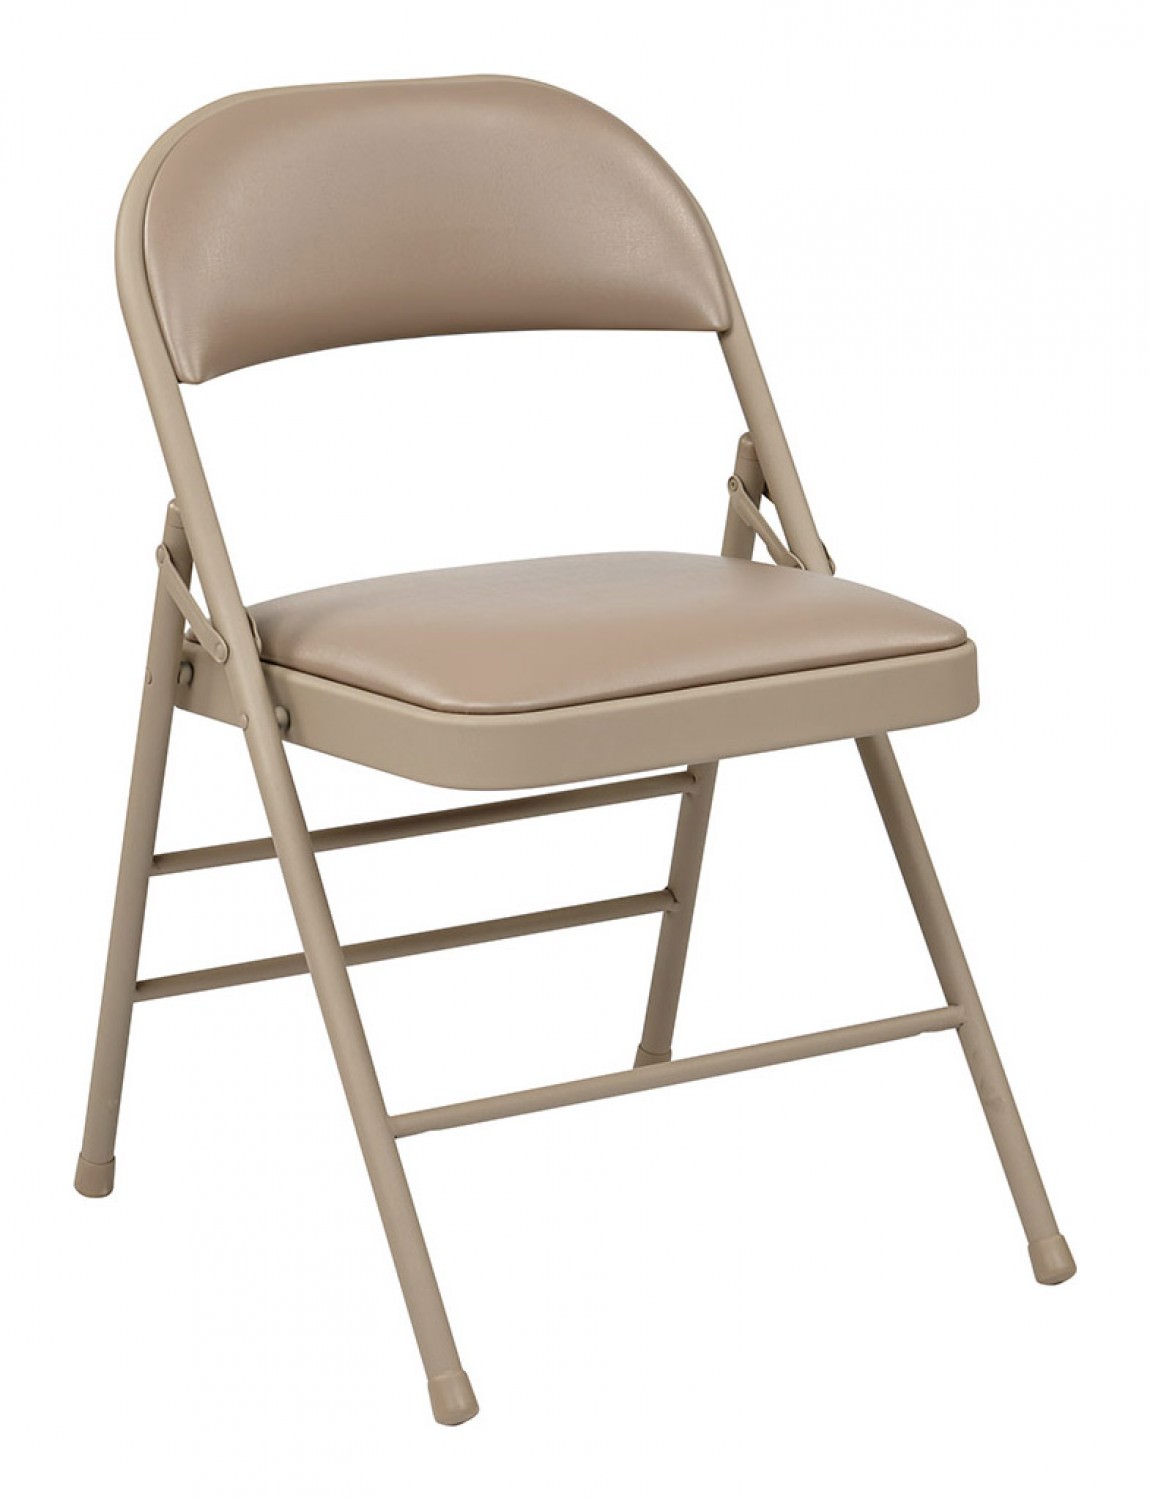 Cosco Blue Metal Upholstered Seat Folding Chair Set